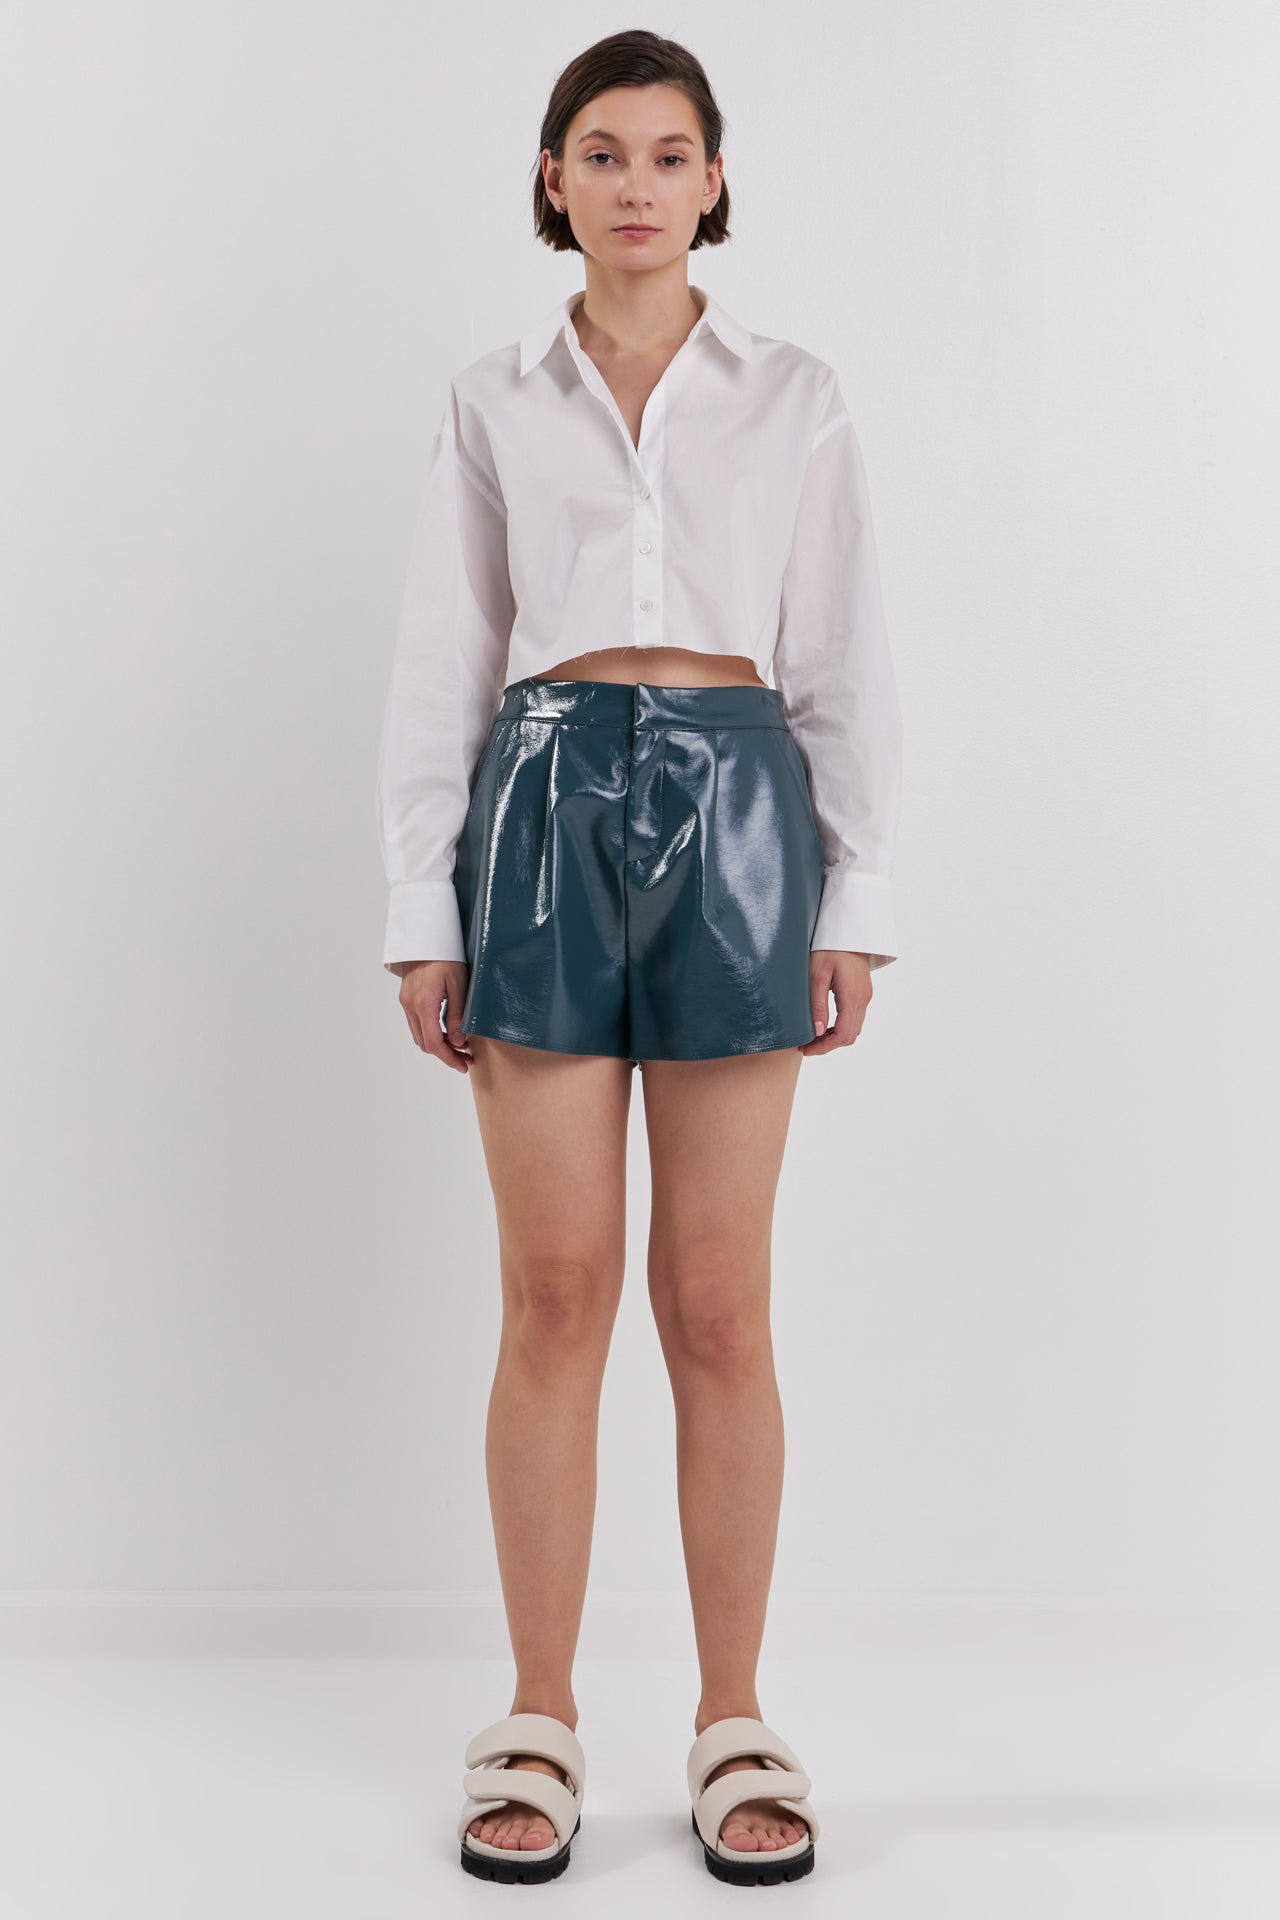 The Gibby High Waist Faux Leather Shorts